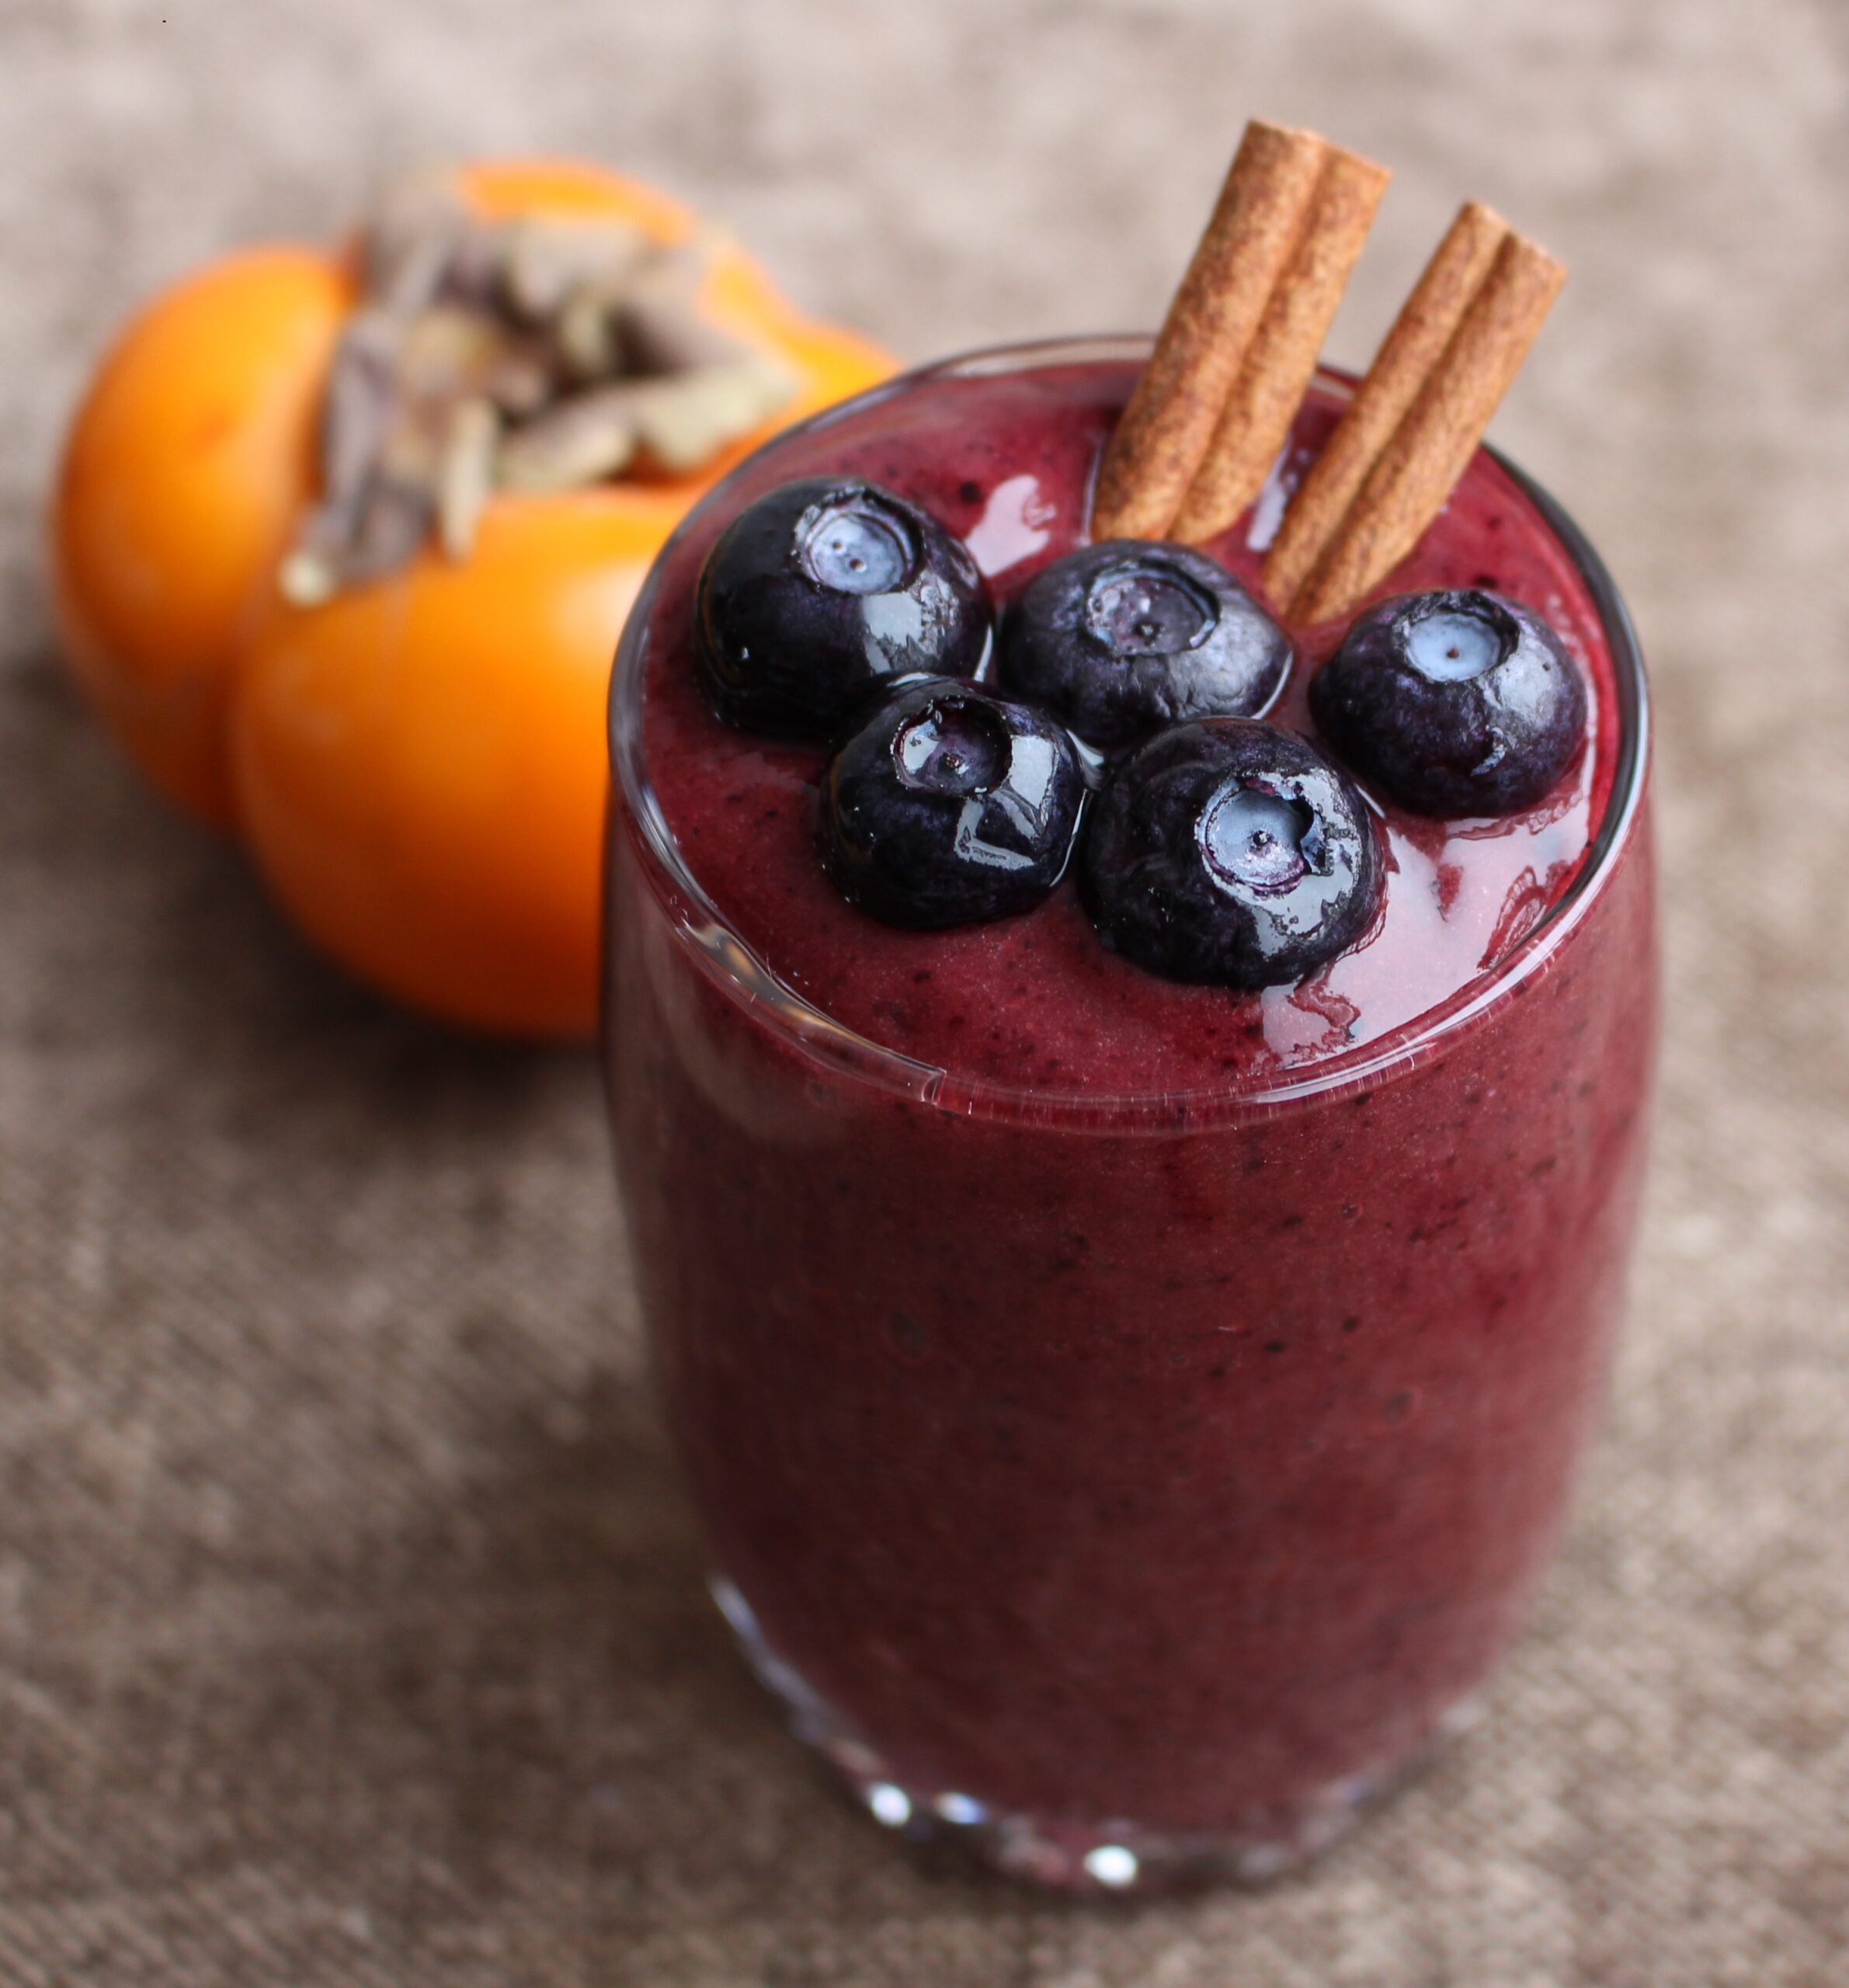 pretty smoothie with blueberries on top and a persimmon in the back